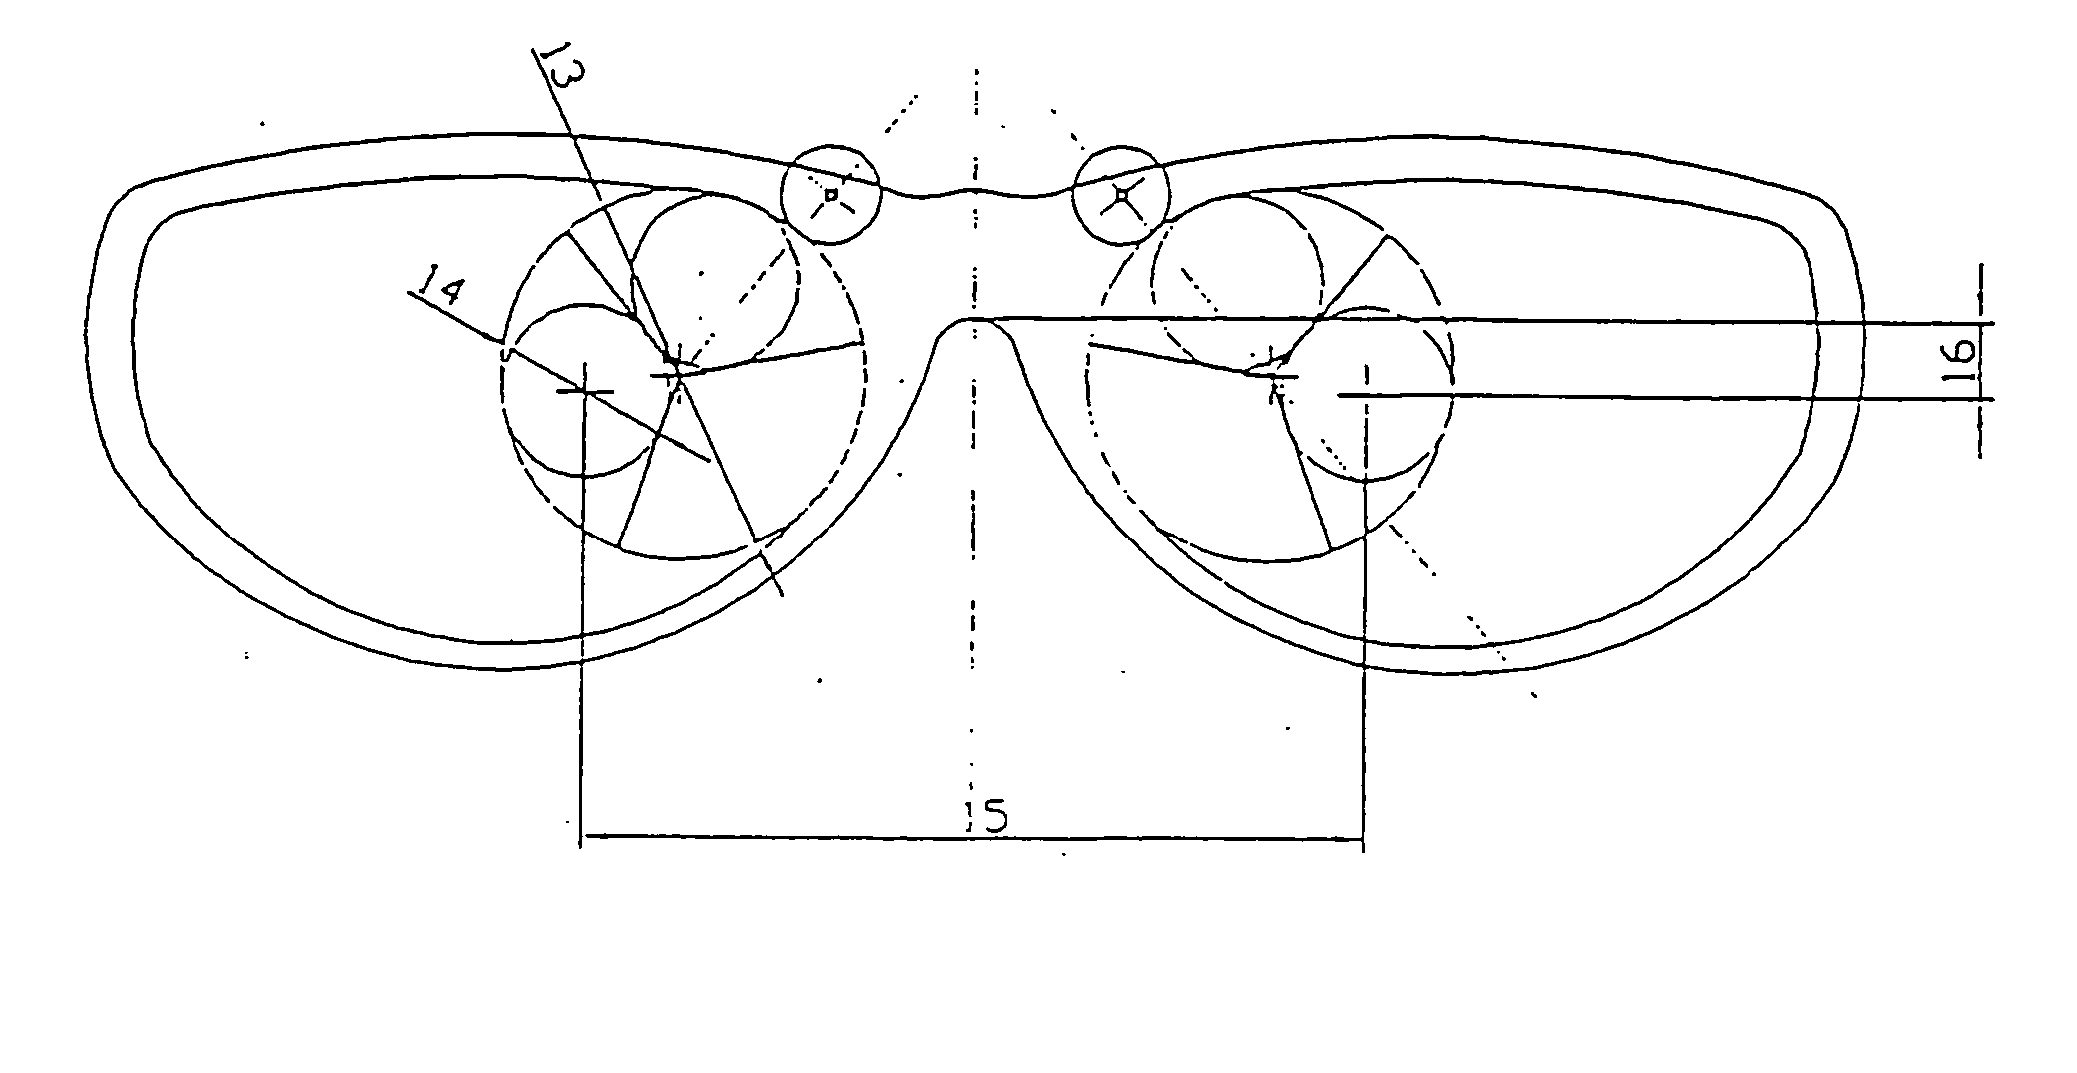 Refractive adapter for close-range viewing, with devices for rotating corrective lens housed in spectacle frames